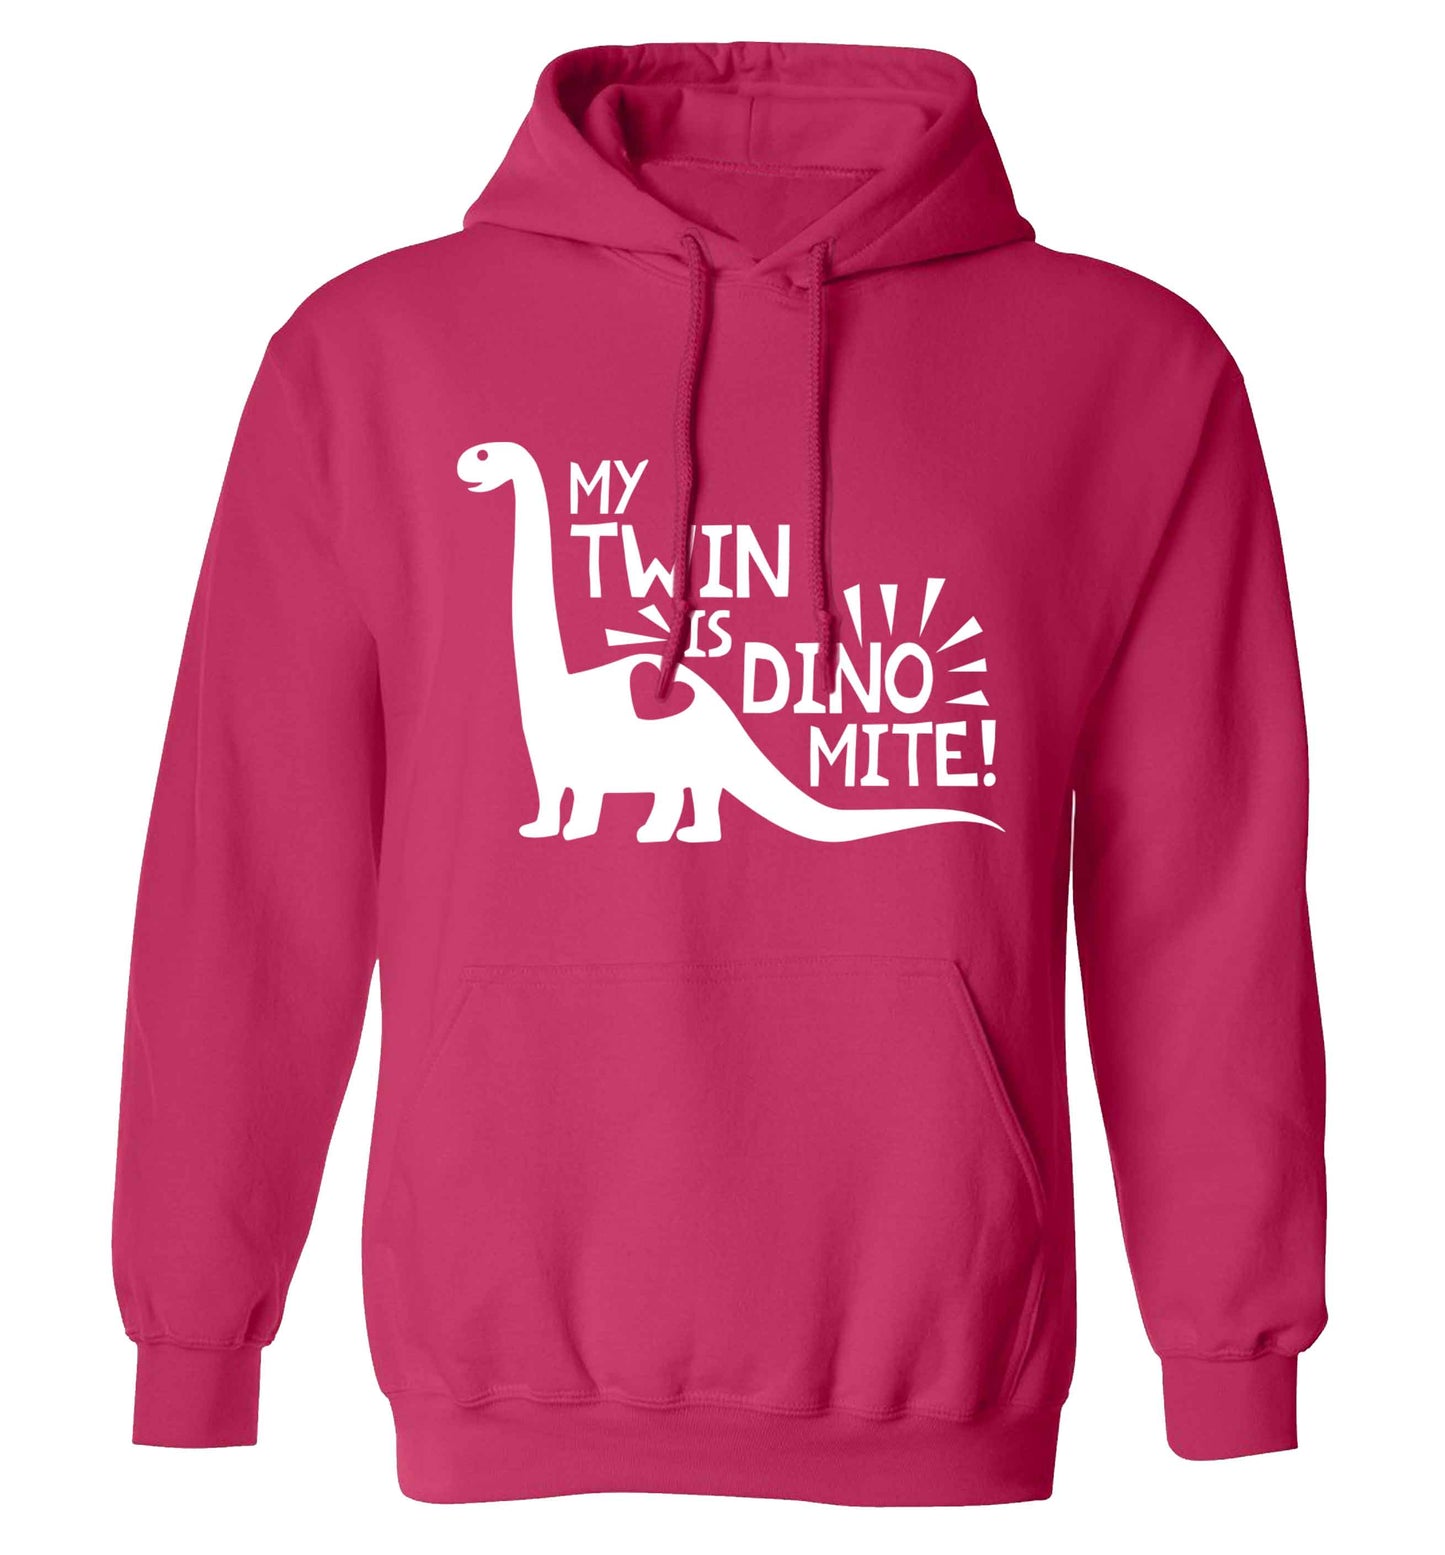 My twin is dinomite! adults unisex pink hoodie 2XL